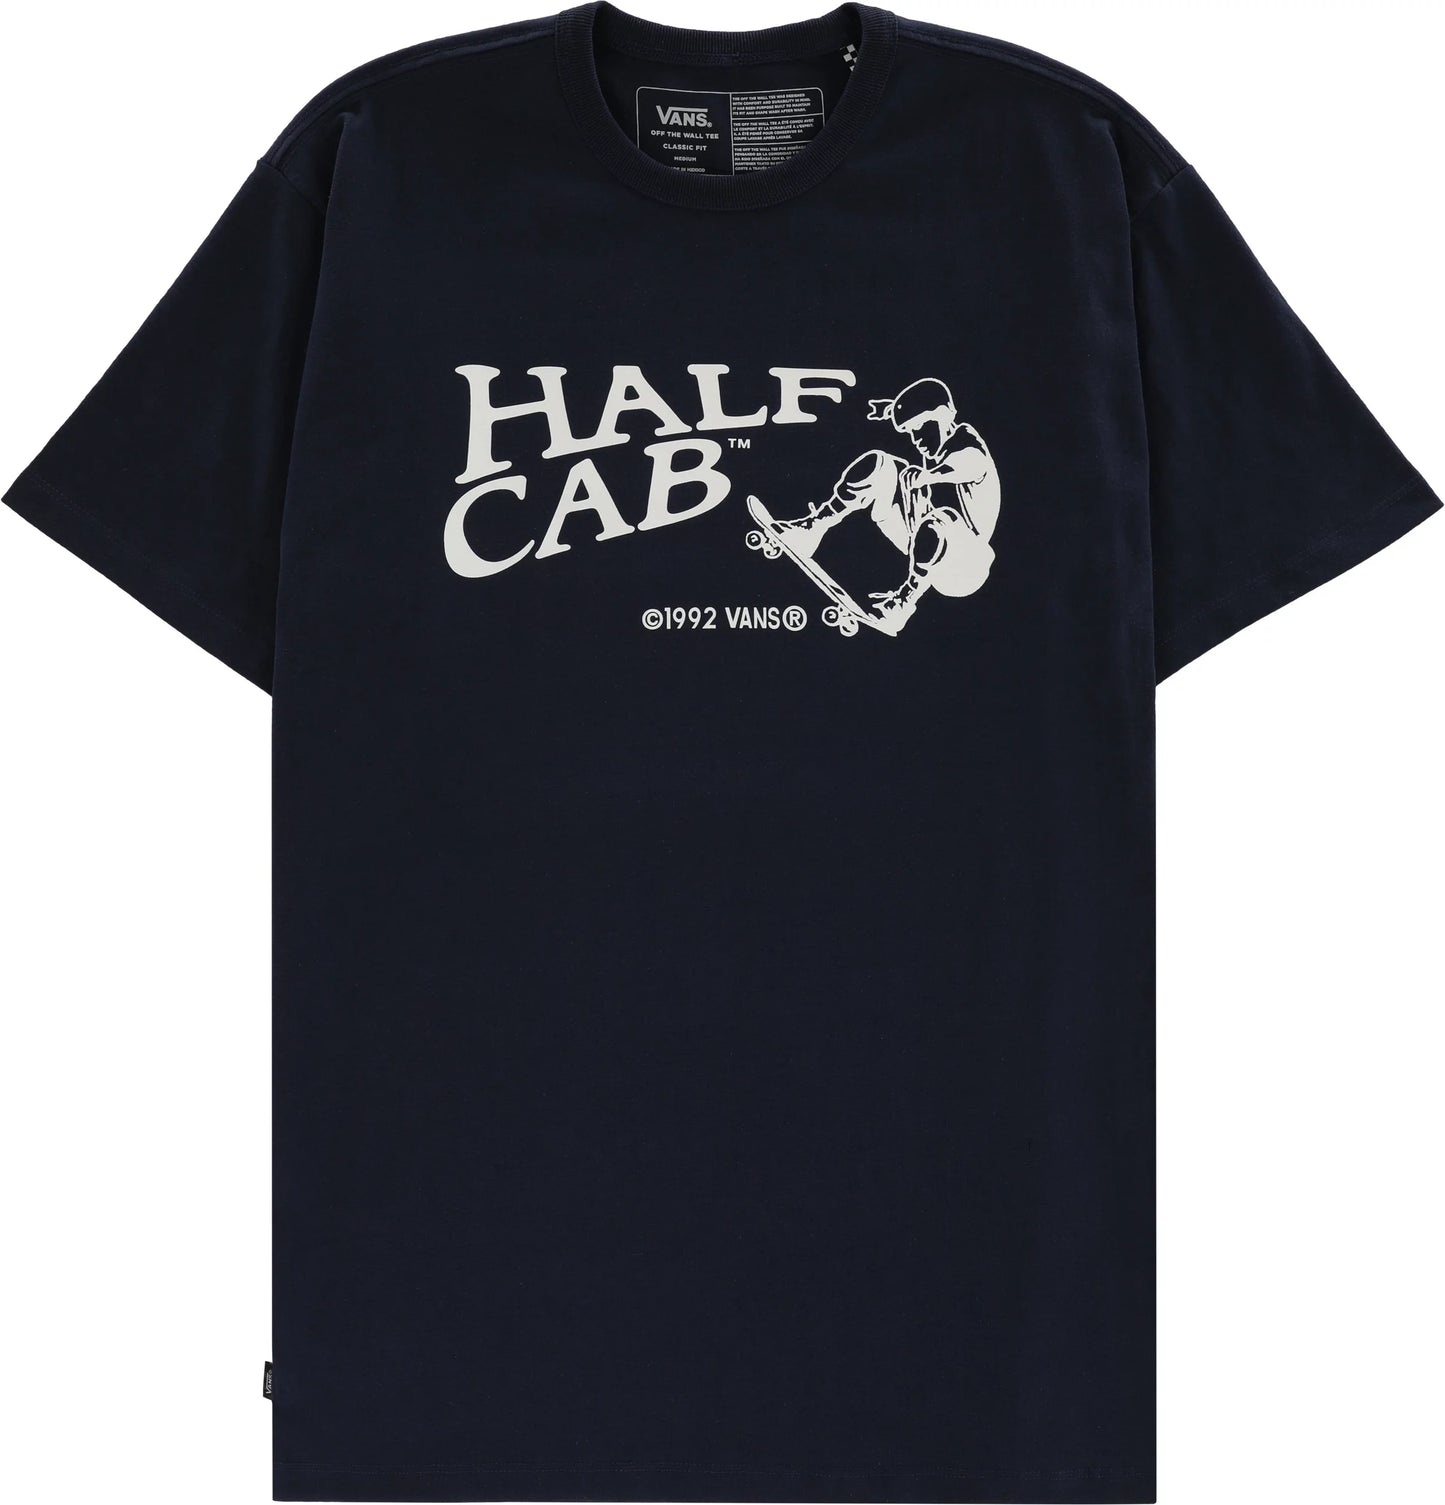 Half Cab 30th Anniversary S/S Tee Shirt Blk(size options listed)